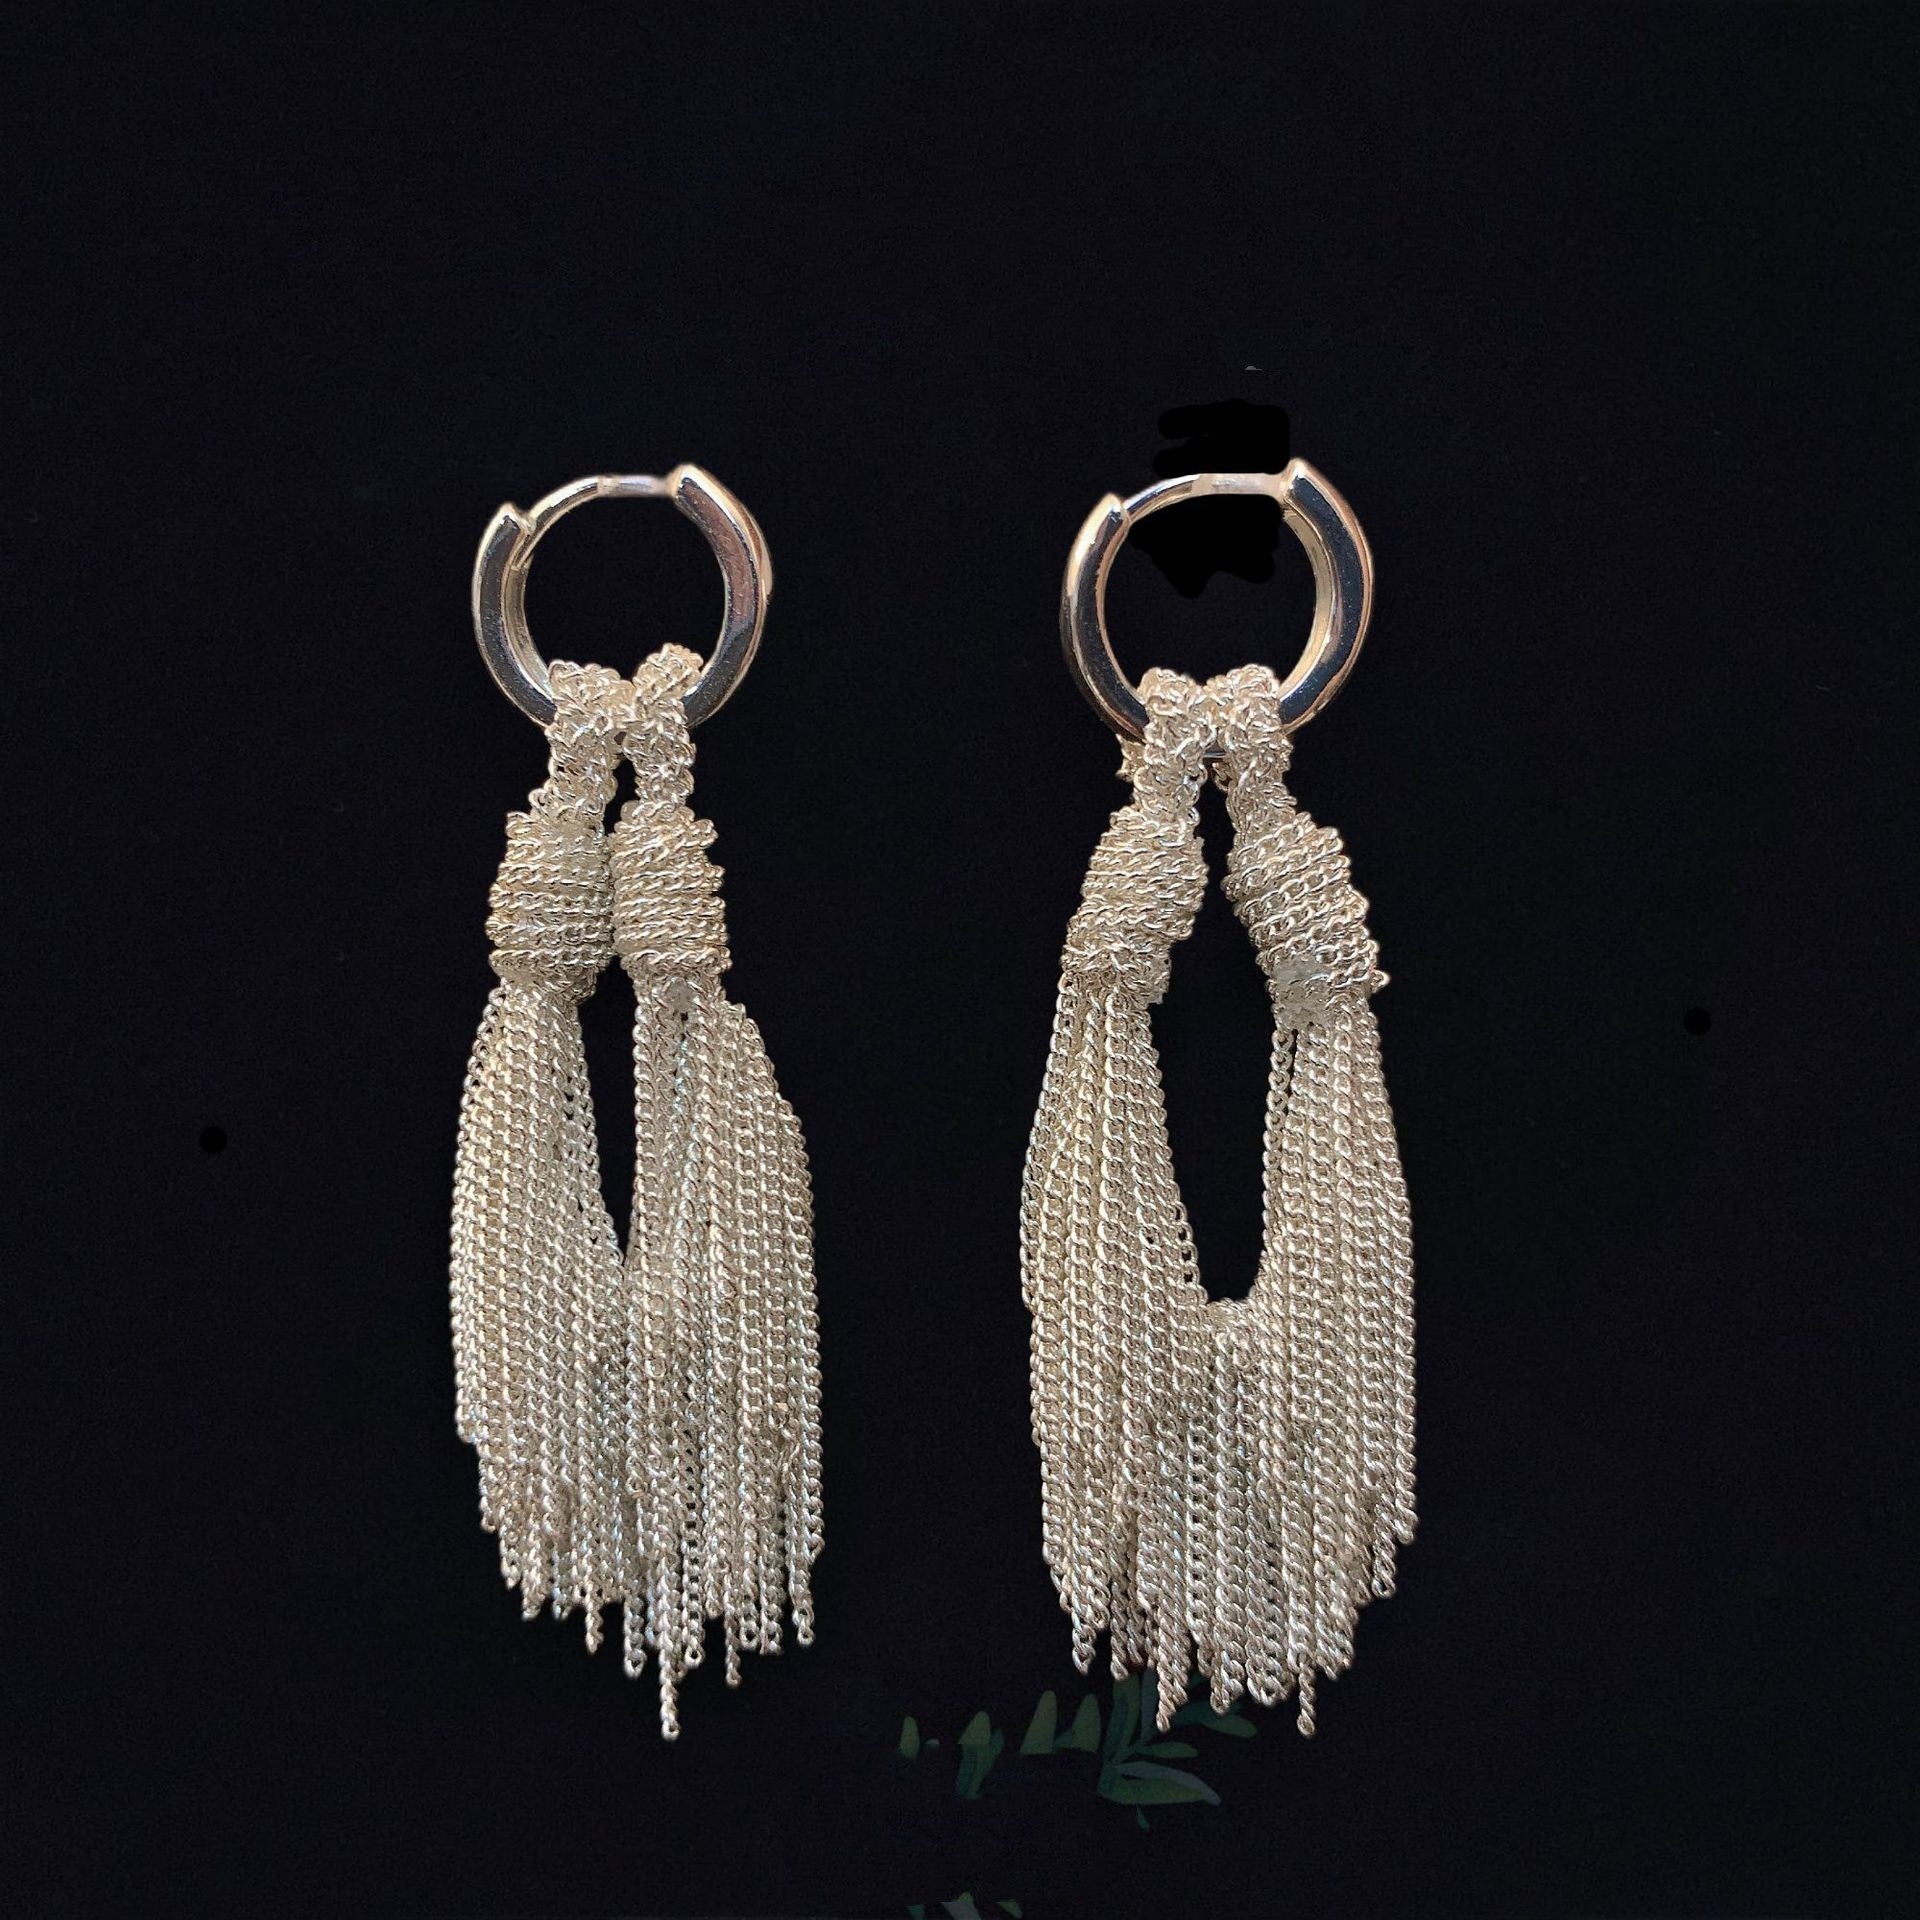 A High Luxury French Style Vintage Style Jewelry Set by Maramalive™ with tassels and tassels.